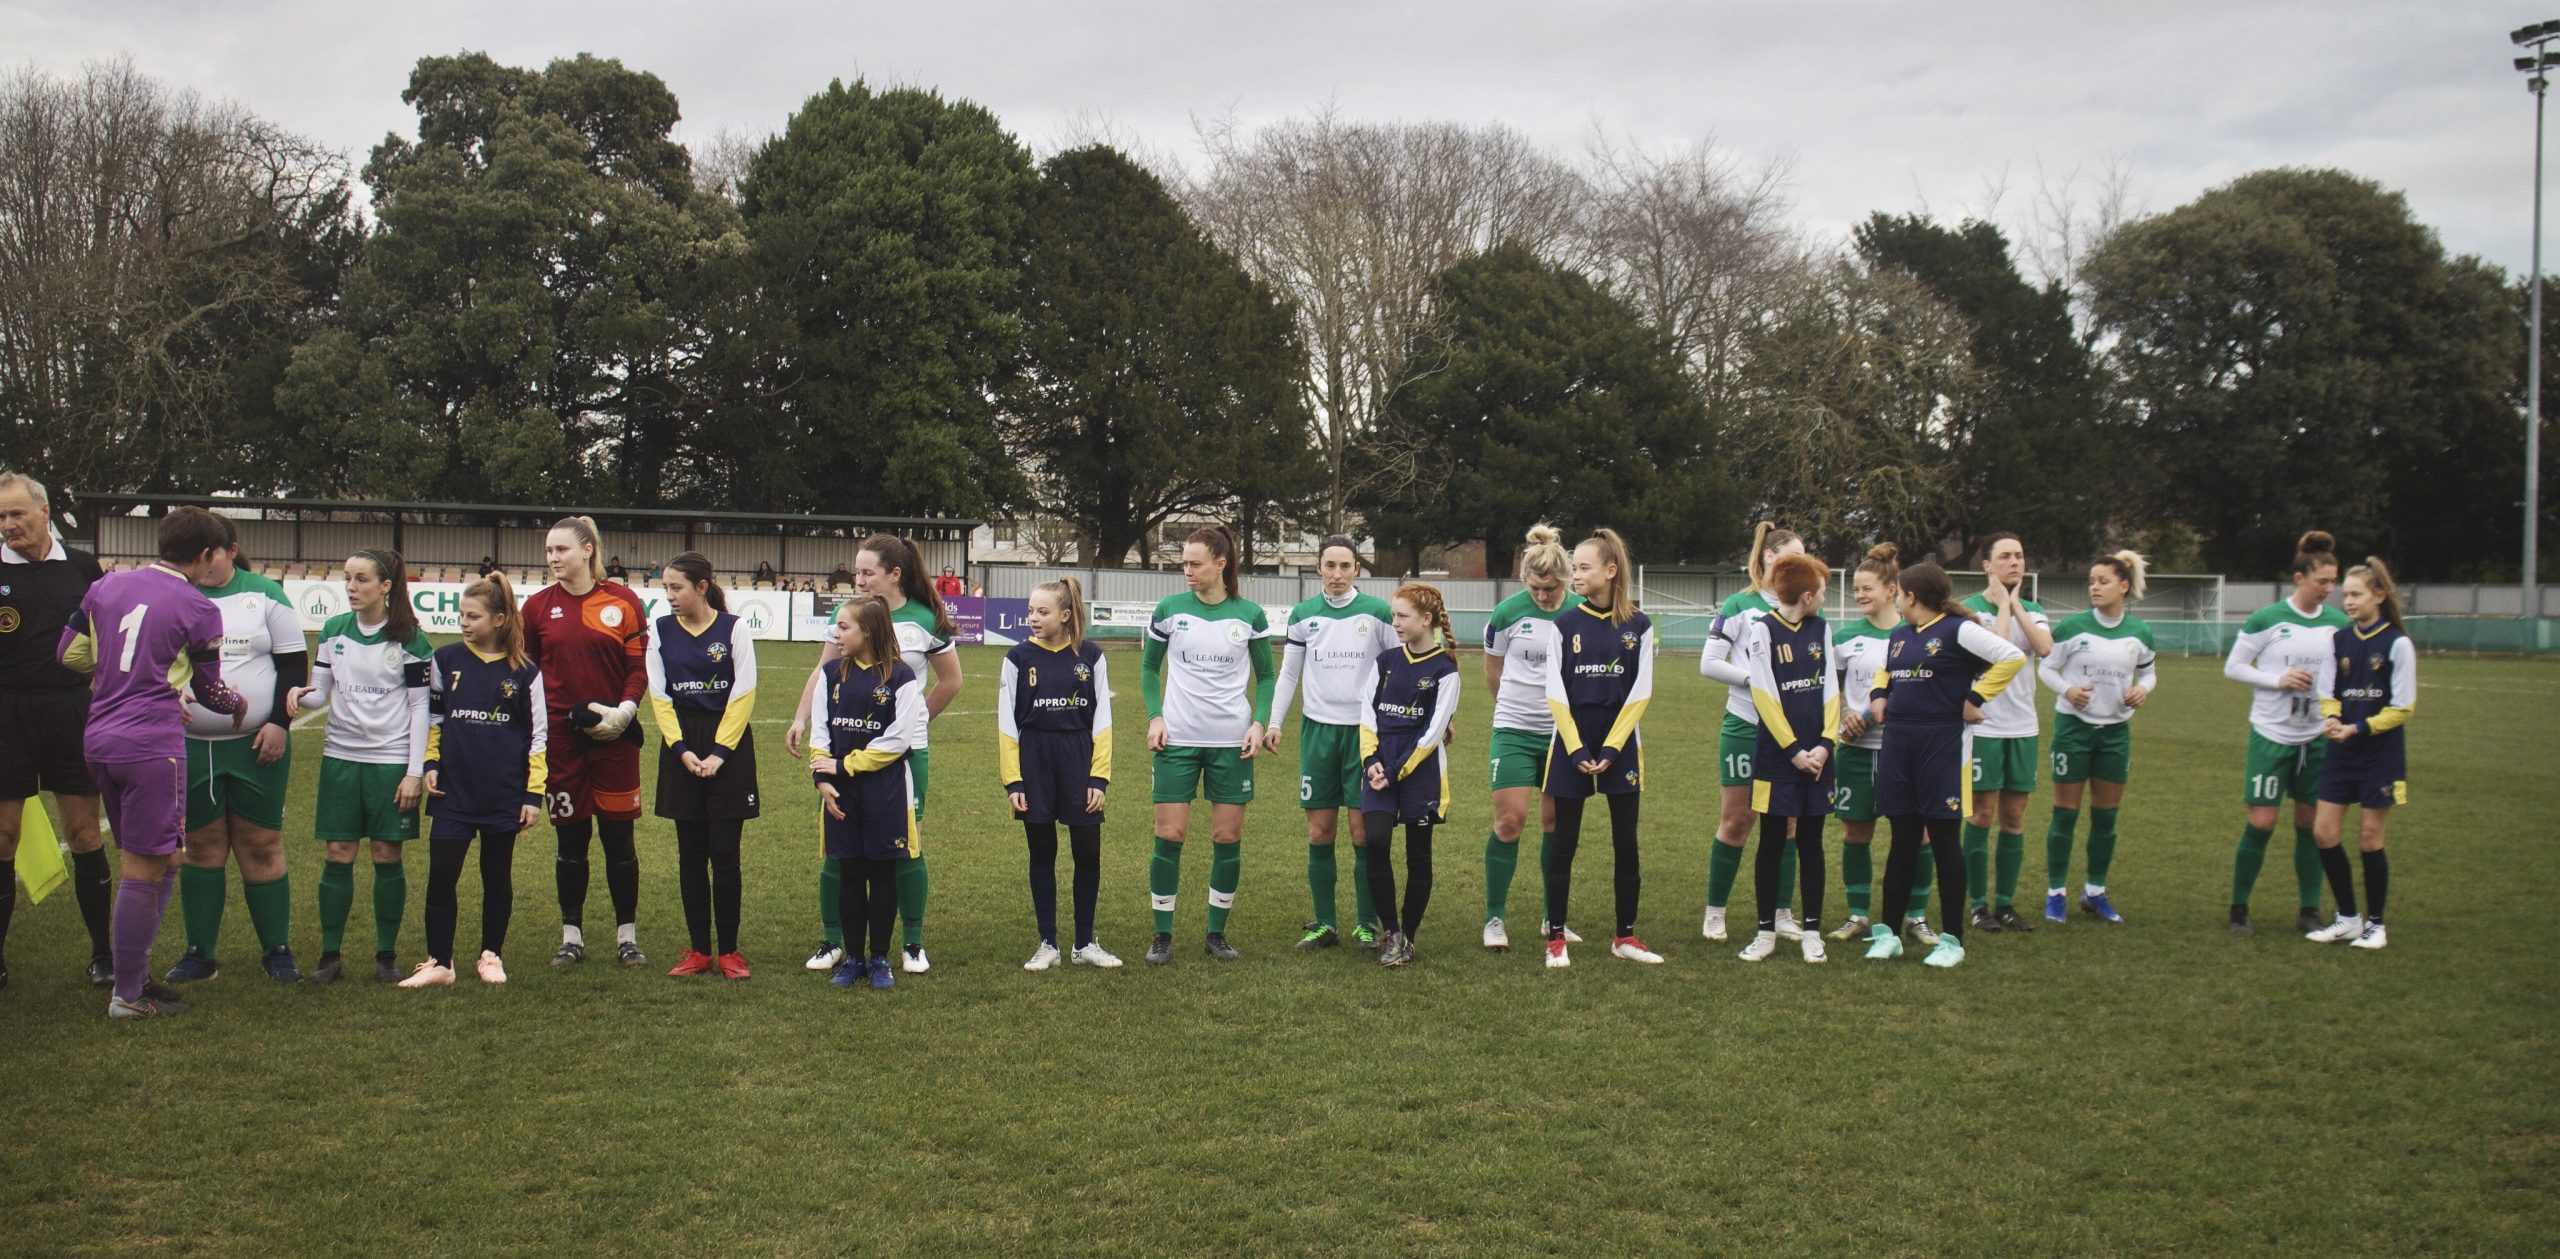 Havant & Waterlooville Girls with Chichester City Ladies prior to their National League tie against Coventry United.